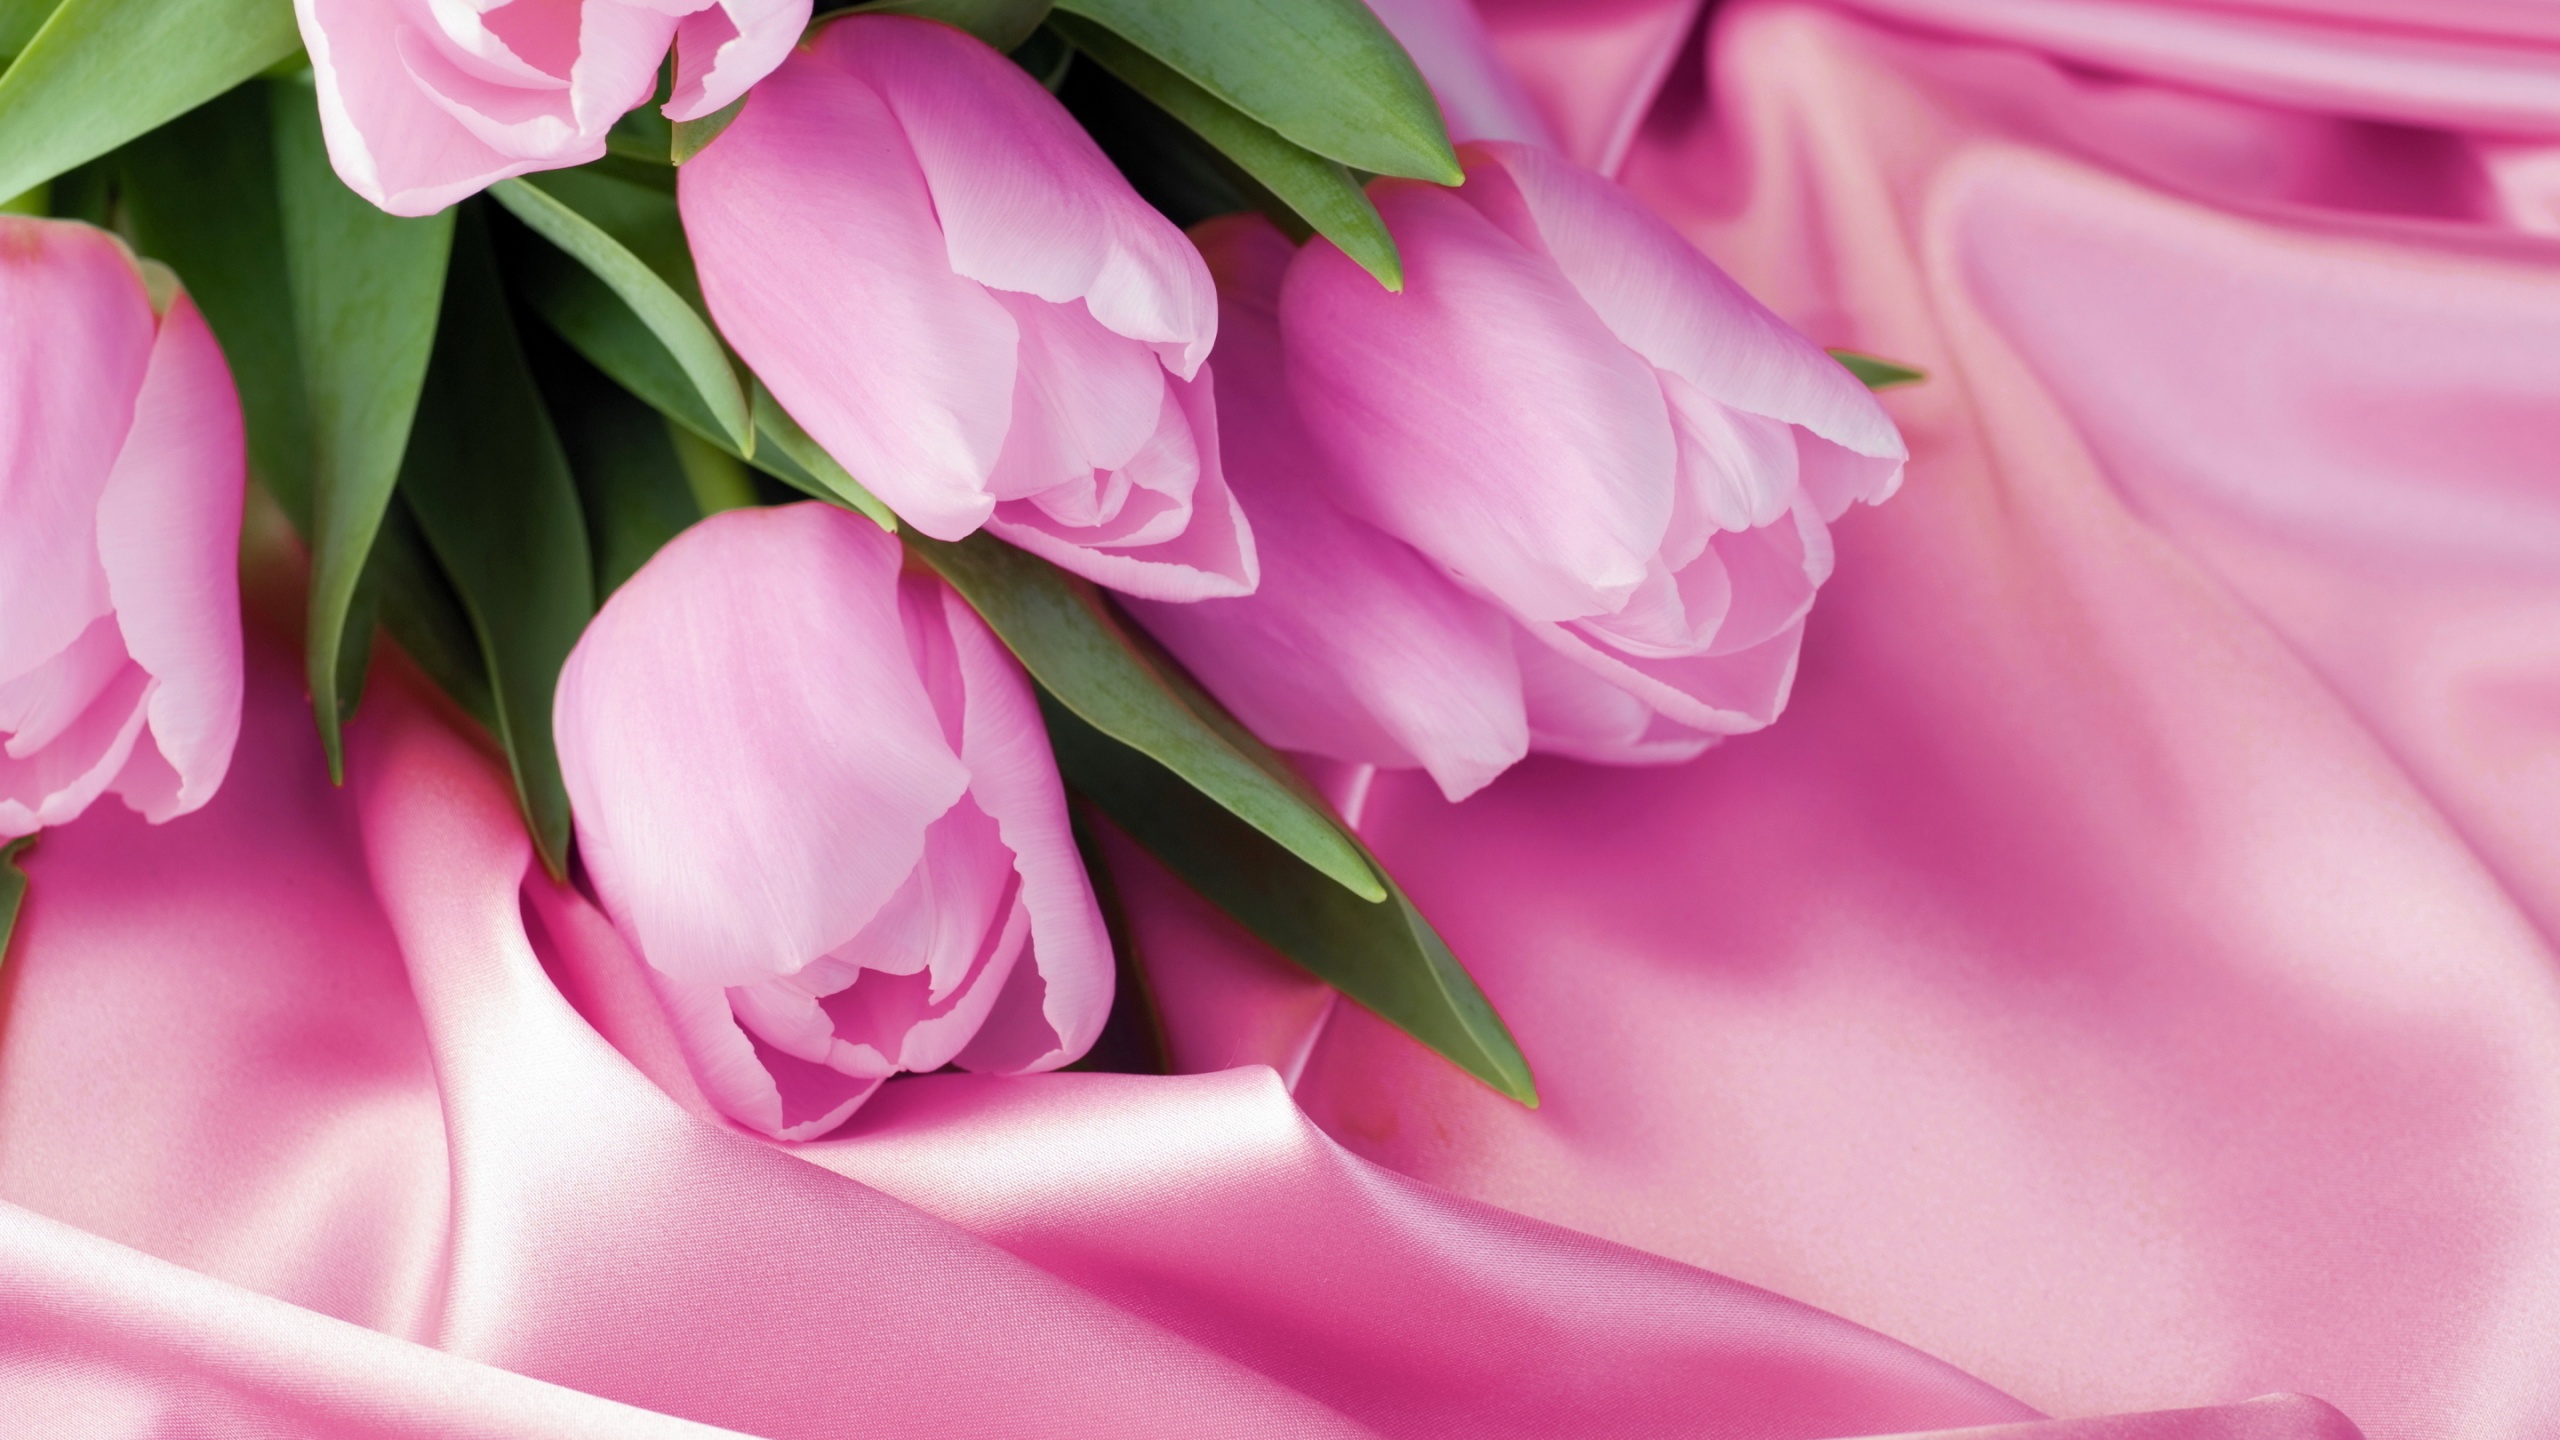 bunch pink tulips hd images free download pictures